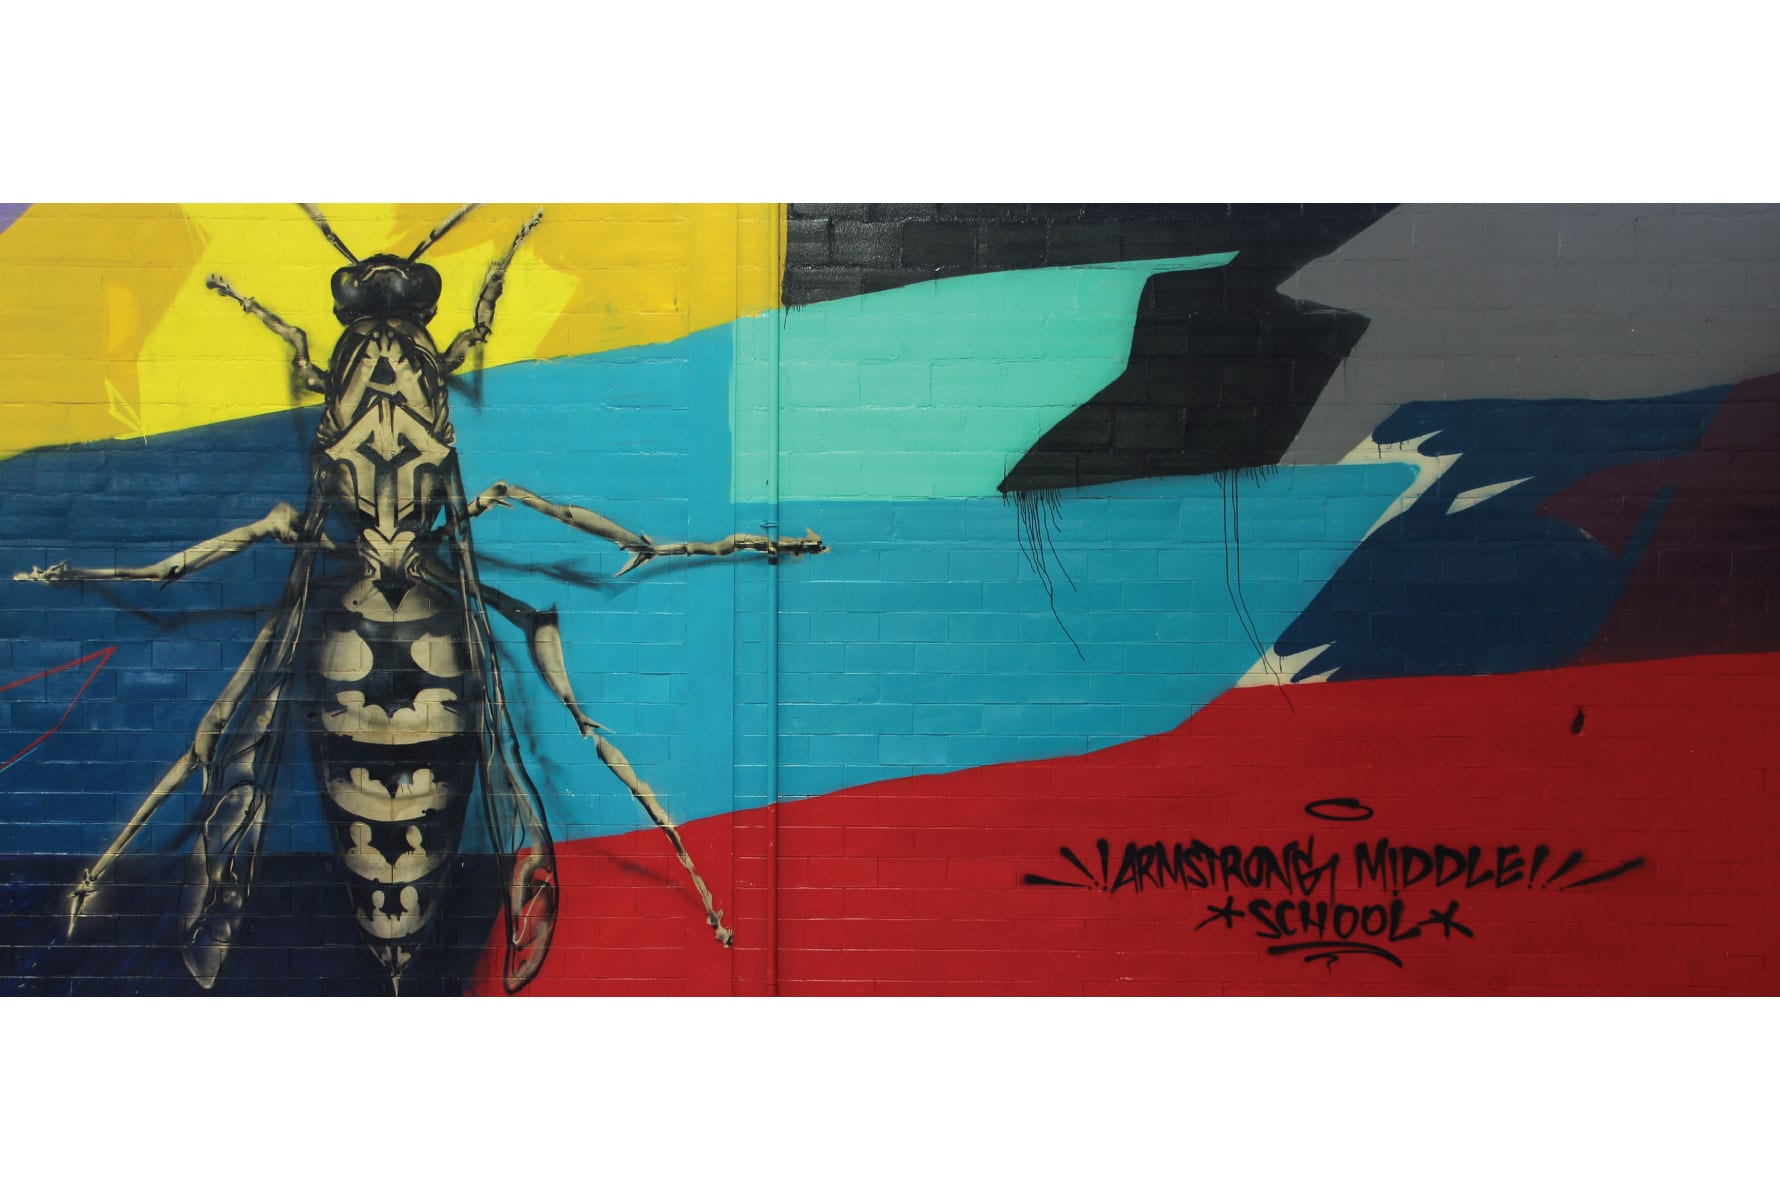 mural - armstrong middle school by benjamin weimeyer located in mississippi